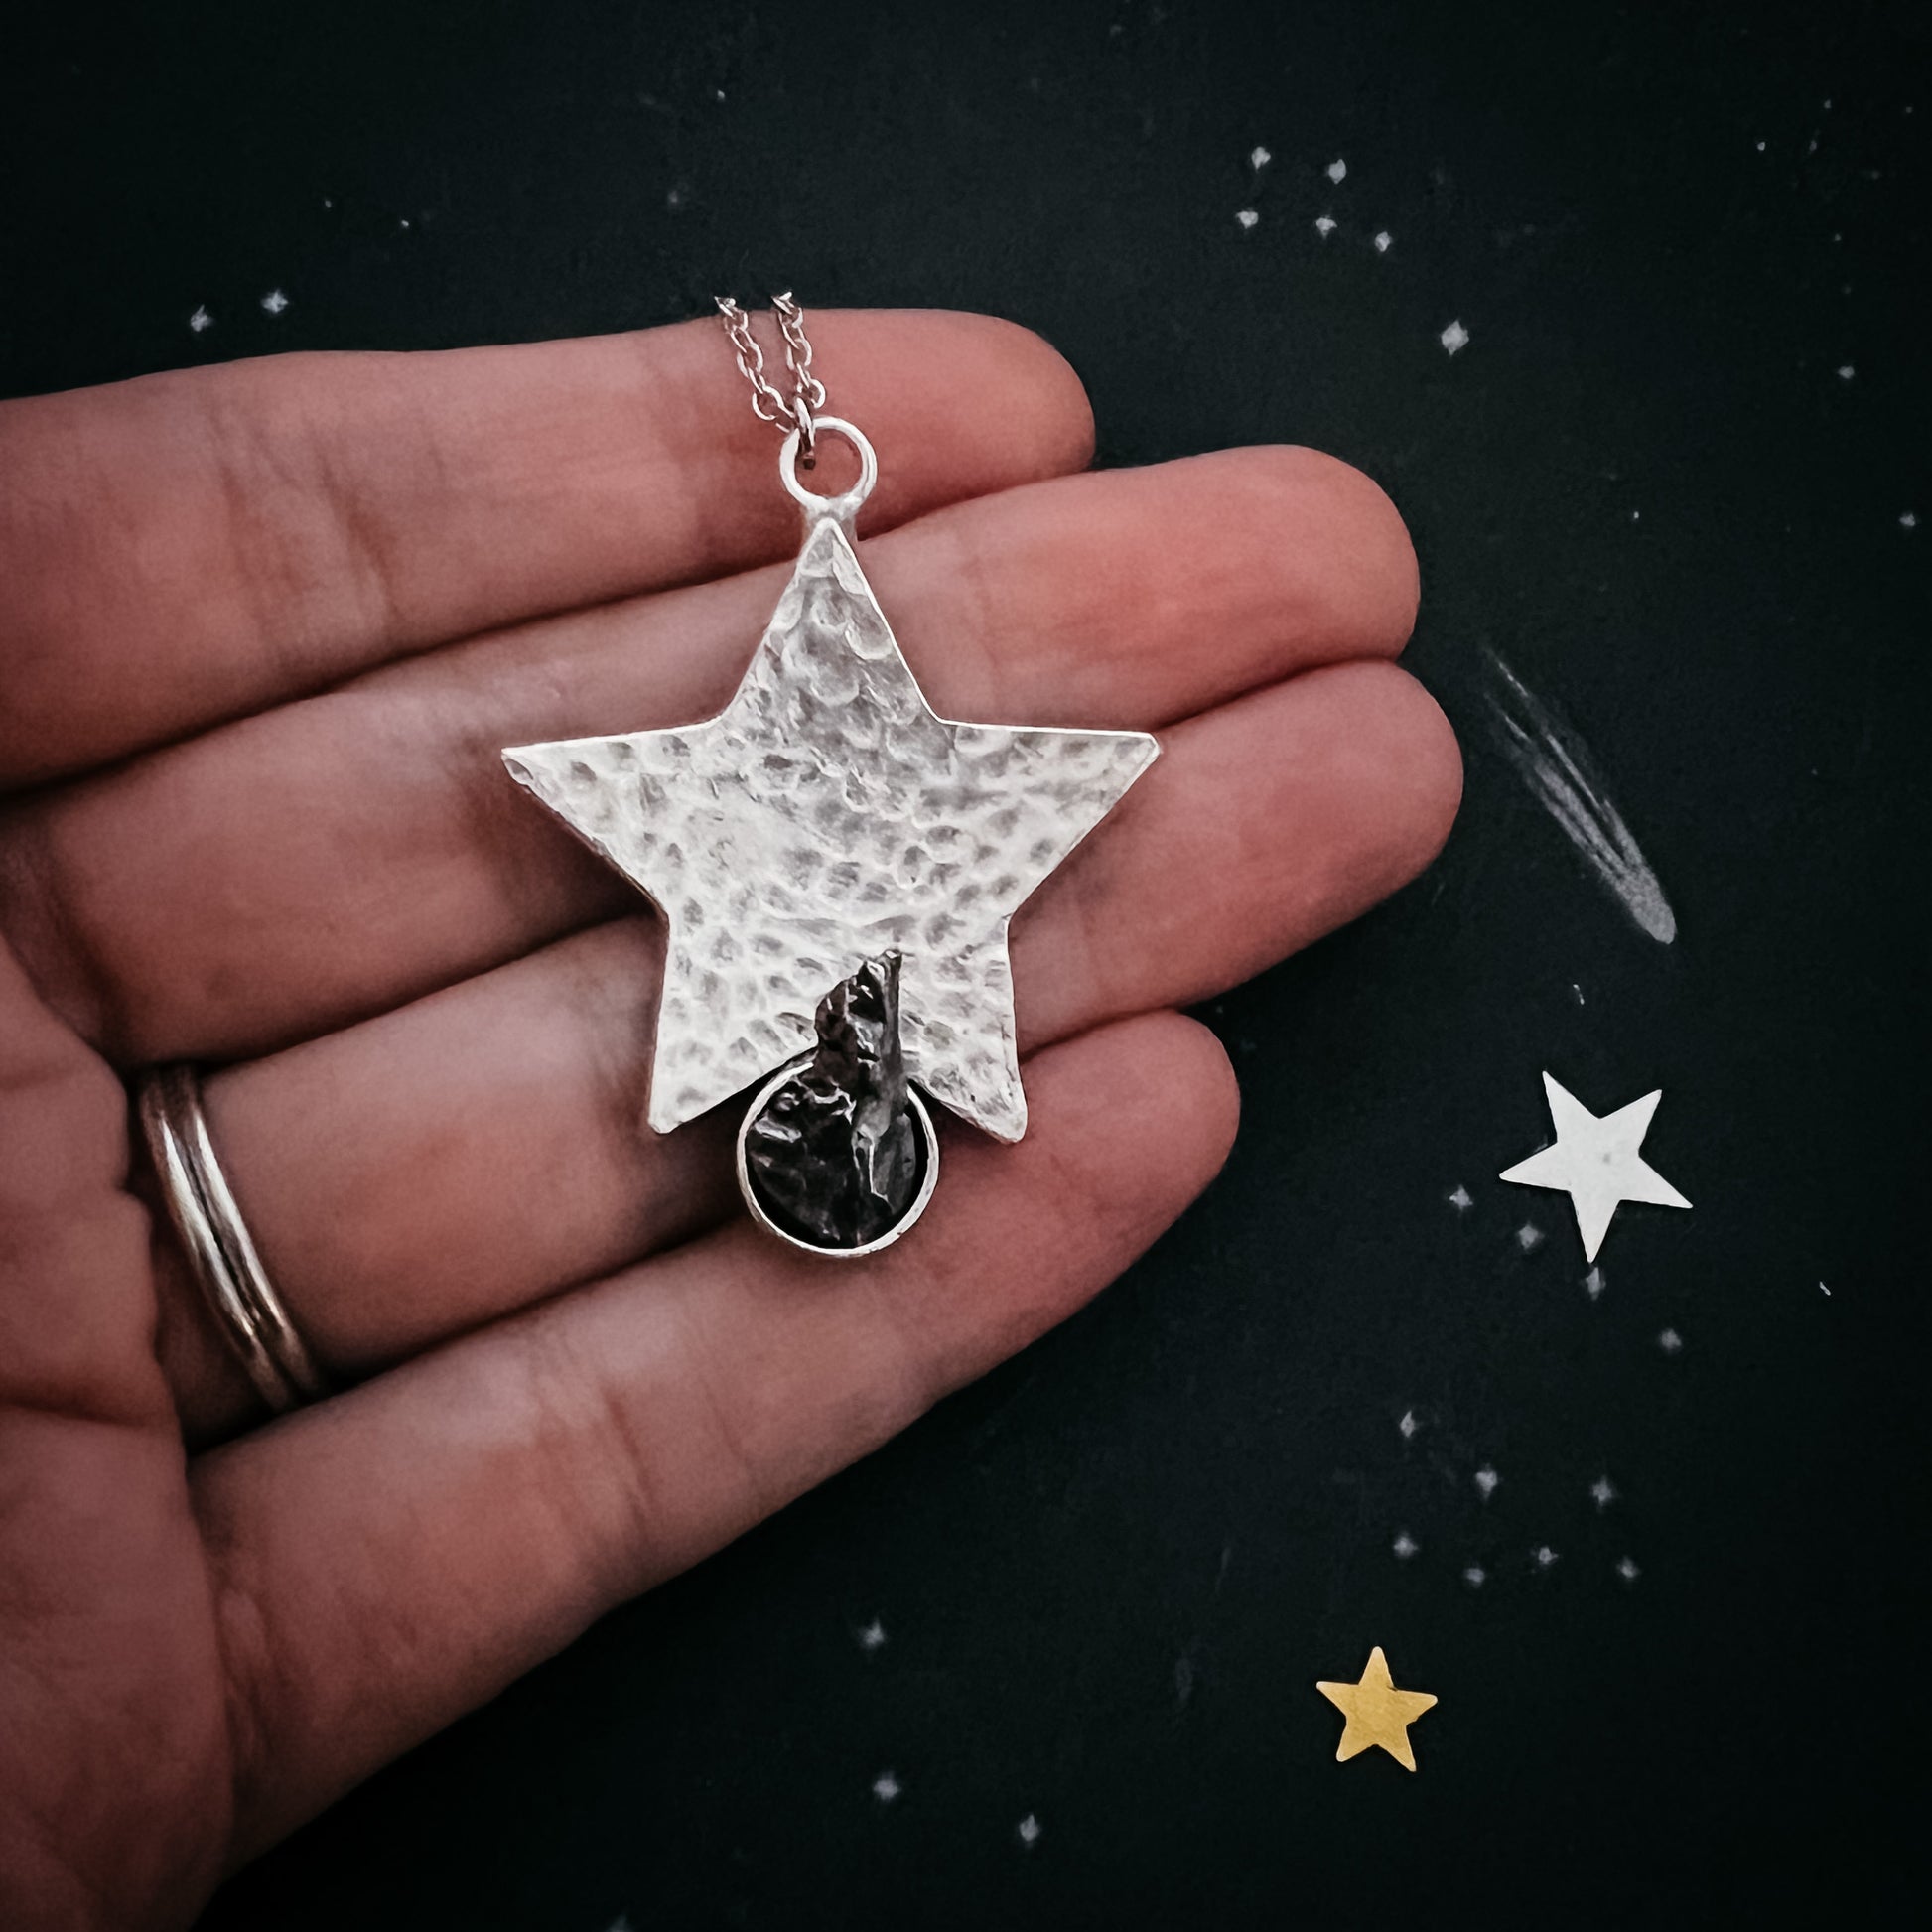 Star Shaped Pendant Necklace with Authentic Meteorite Necklace Yugen Handmade   